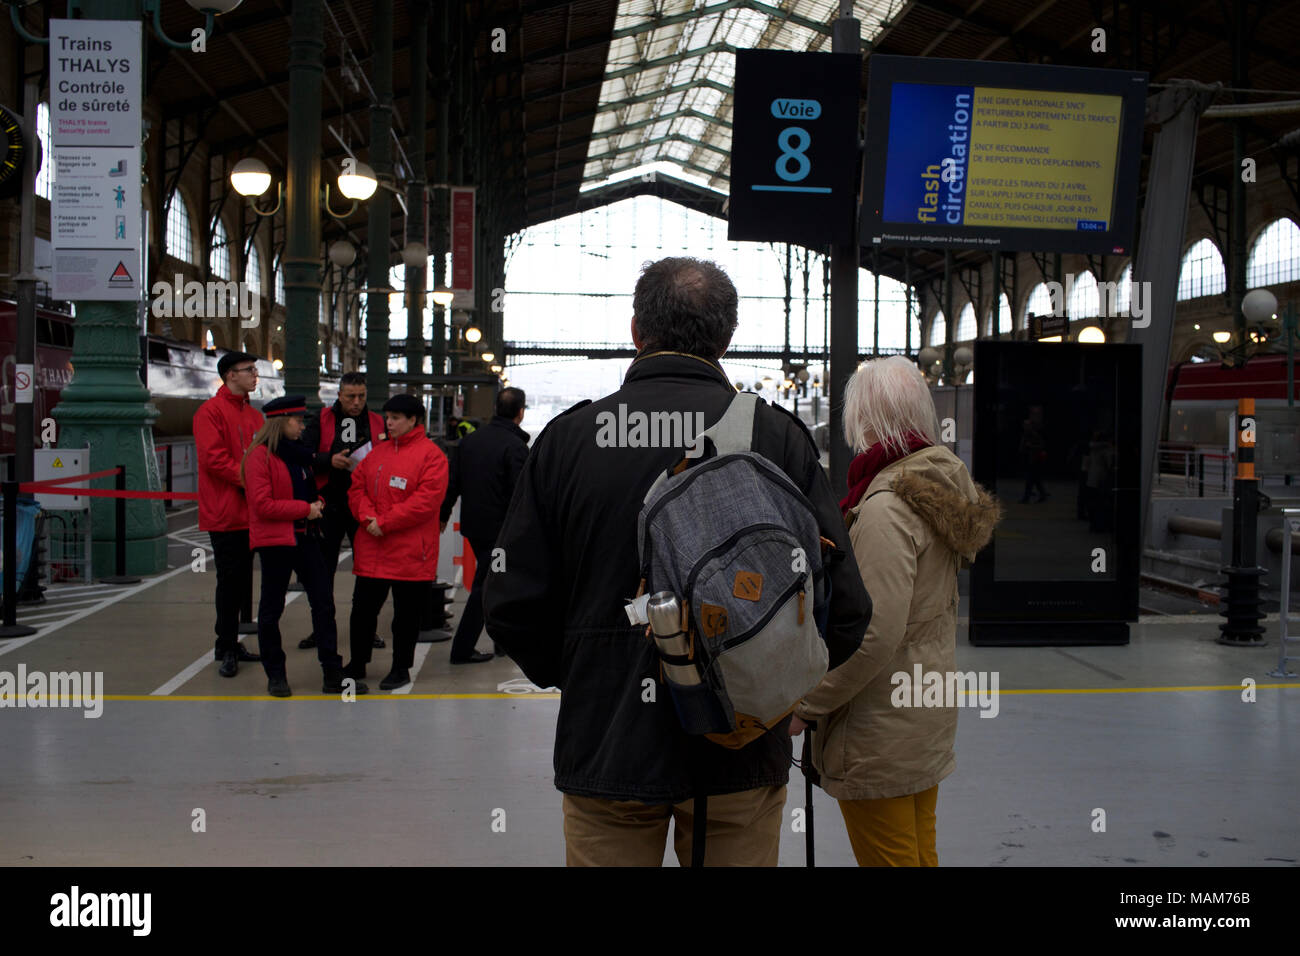 Couple wait for information about their journey after trains are cancelled due to train strikes, Gare de Nord, Paris, France Stock Photo